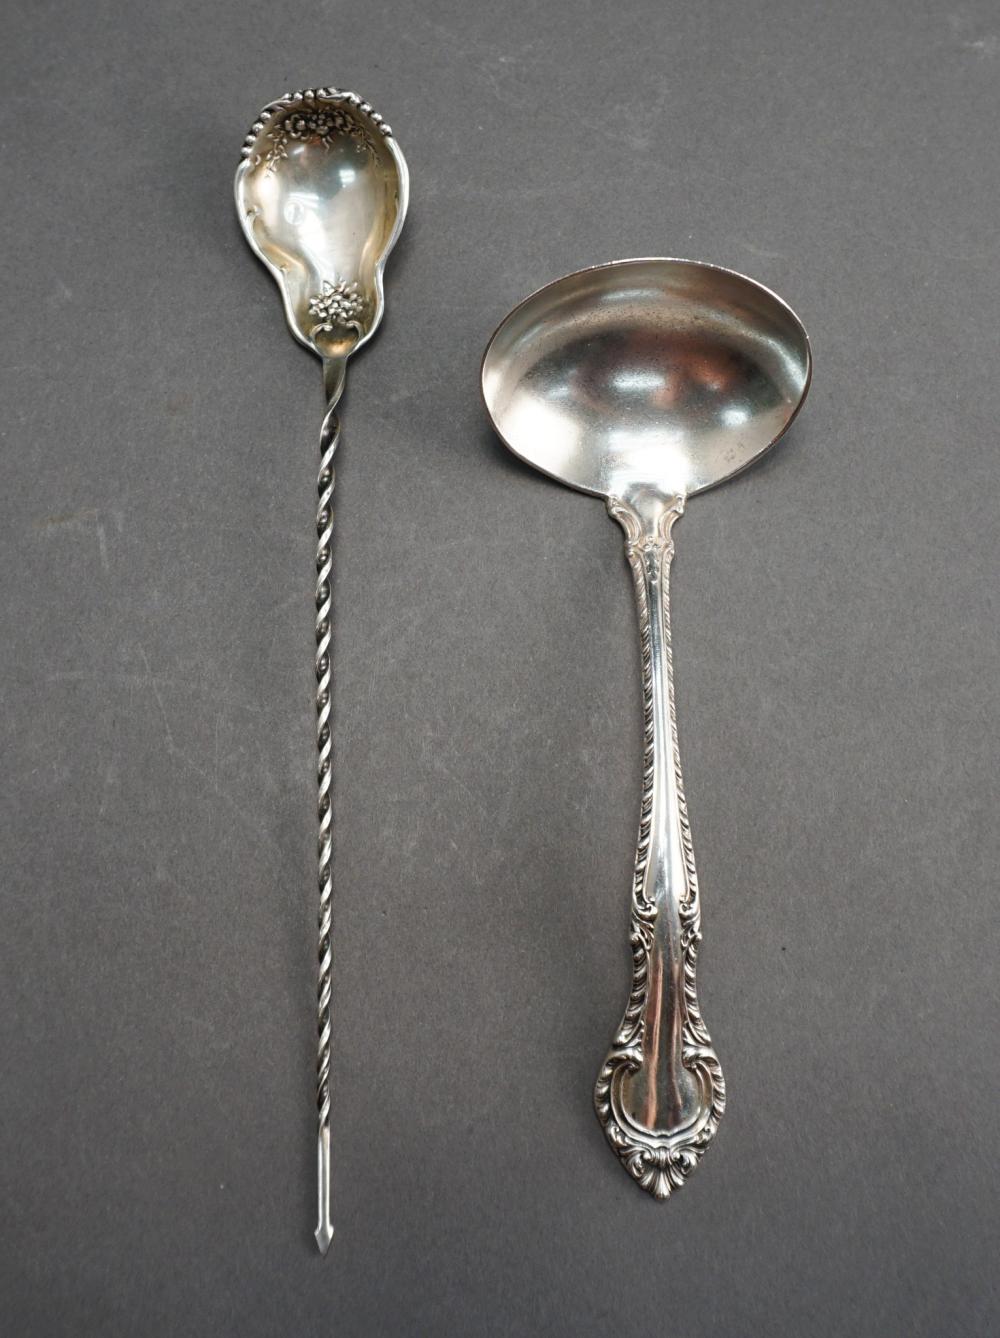 AMERICAN STERLING SILVER LADLE